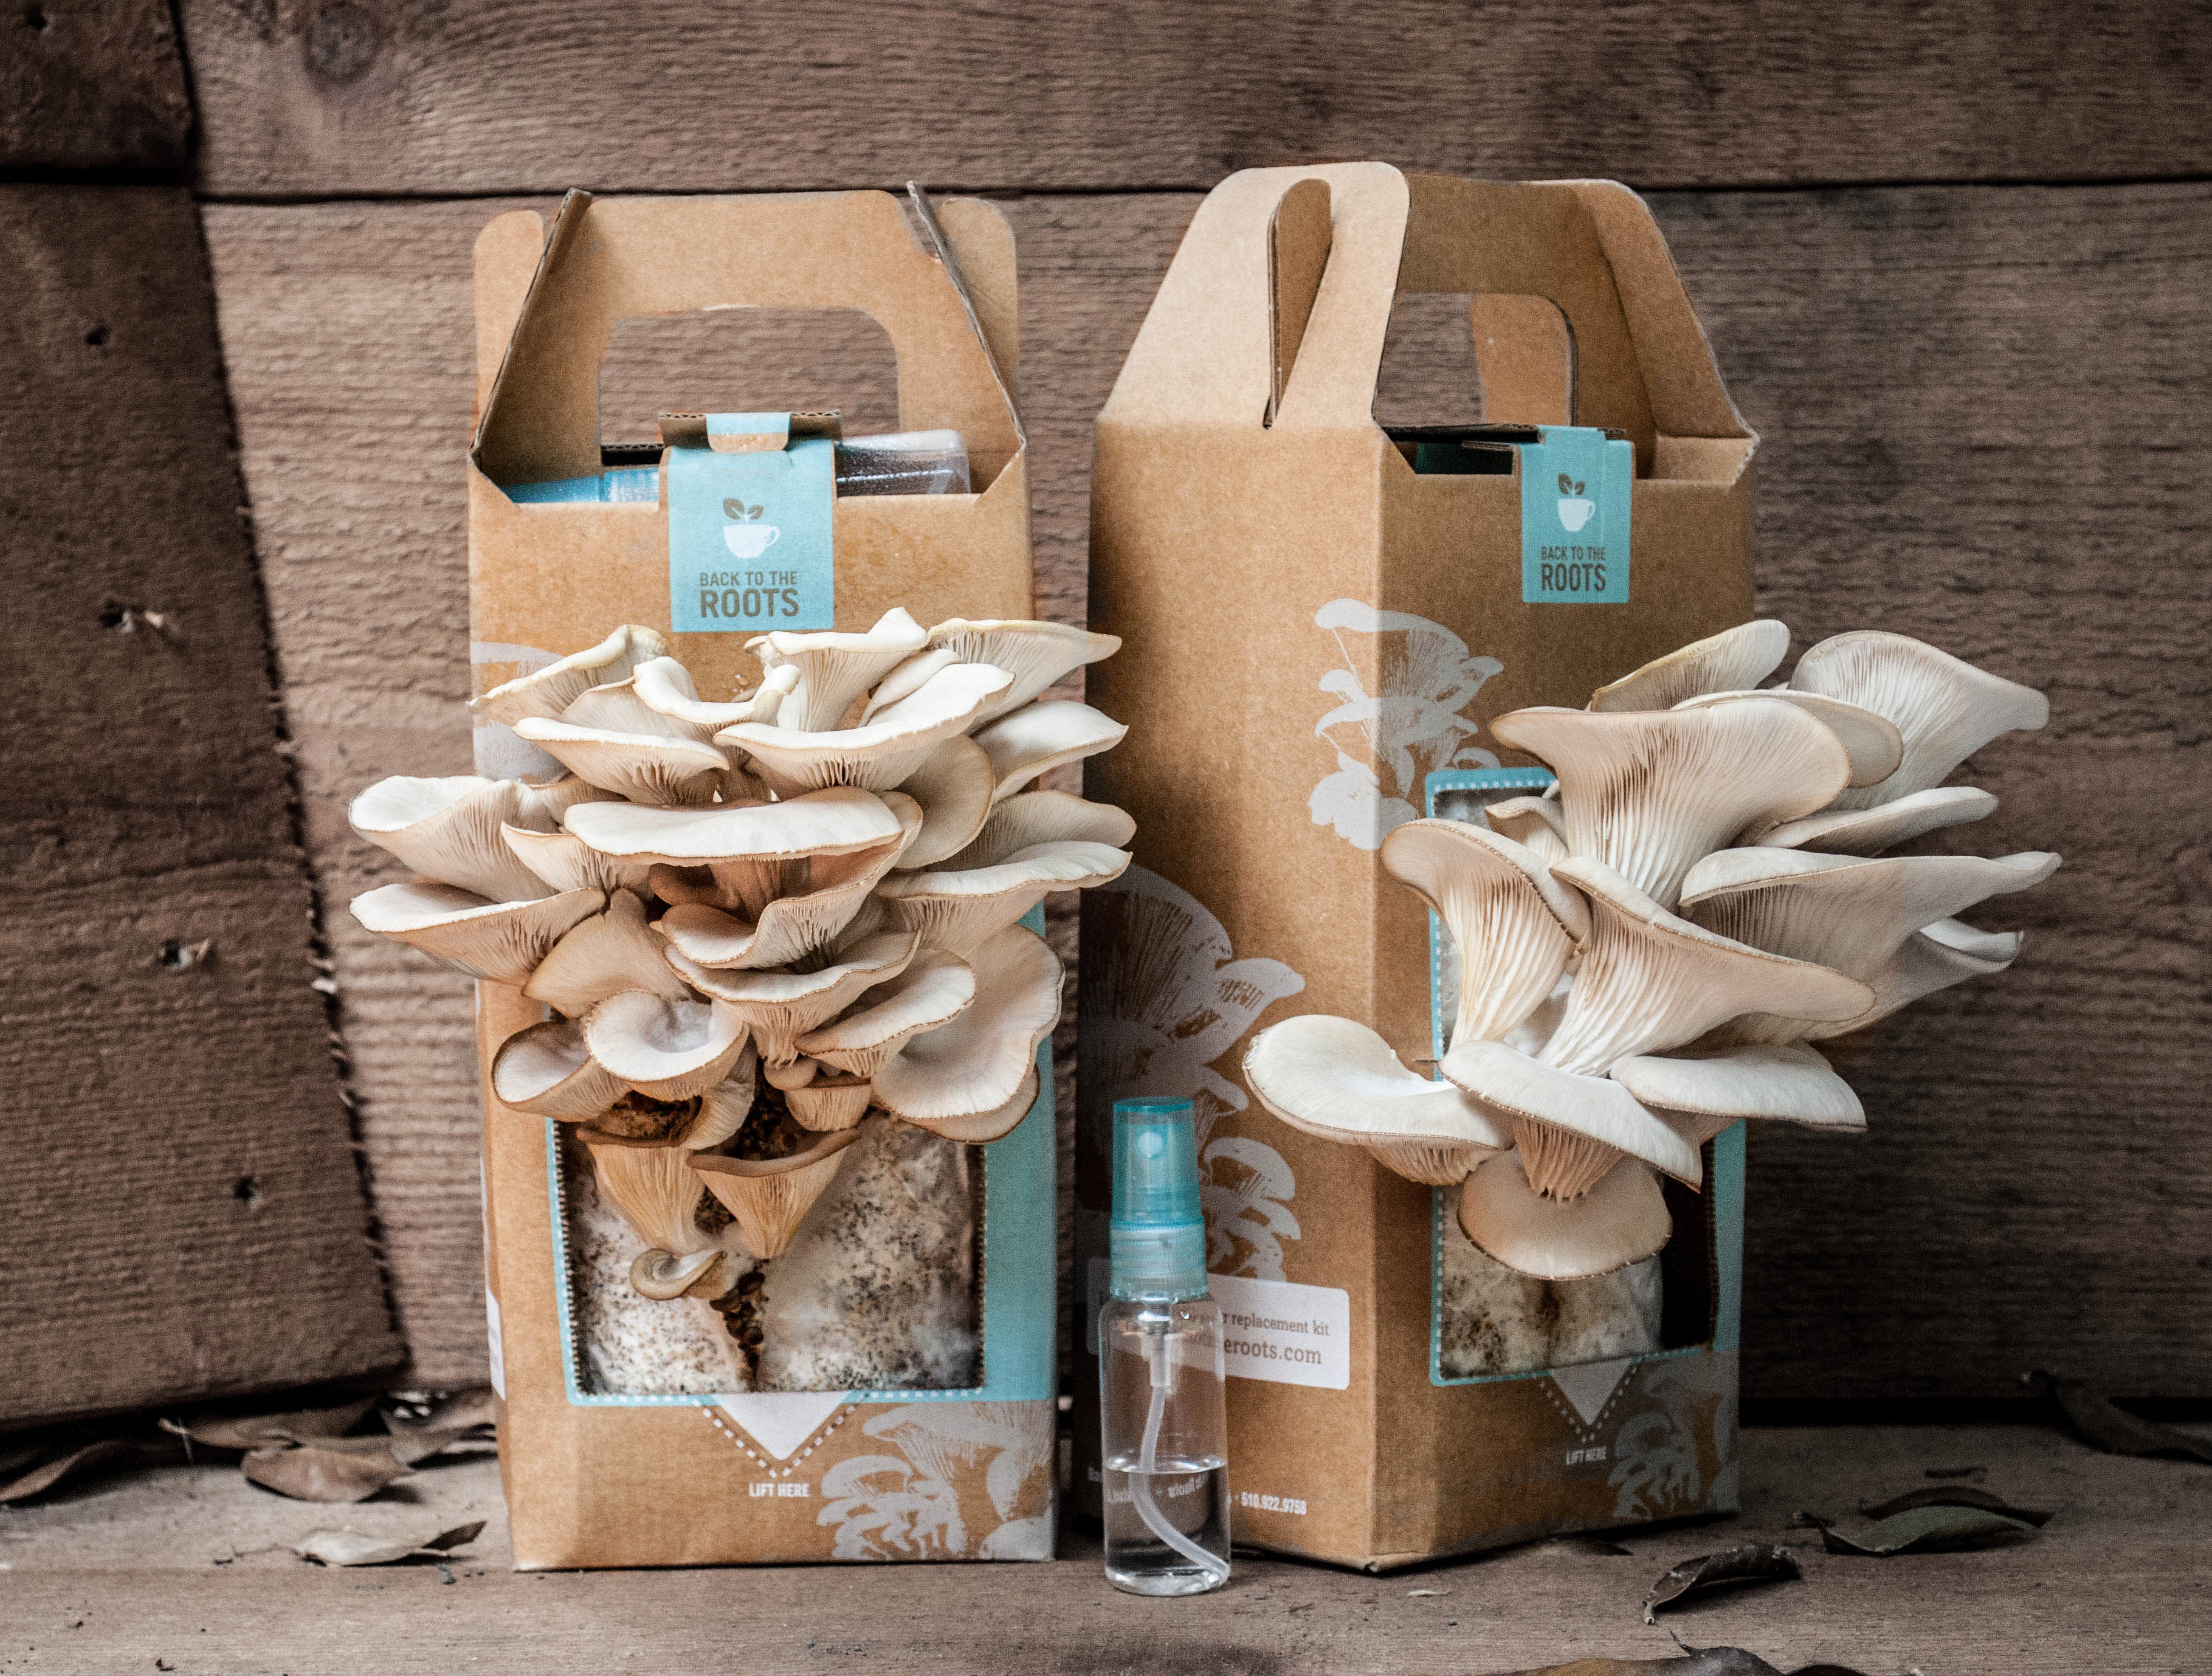 Back to the Roots Oyster Mushroom Kit Dual Fruiting Lifestyle